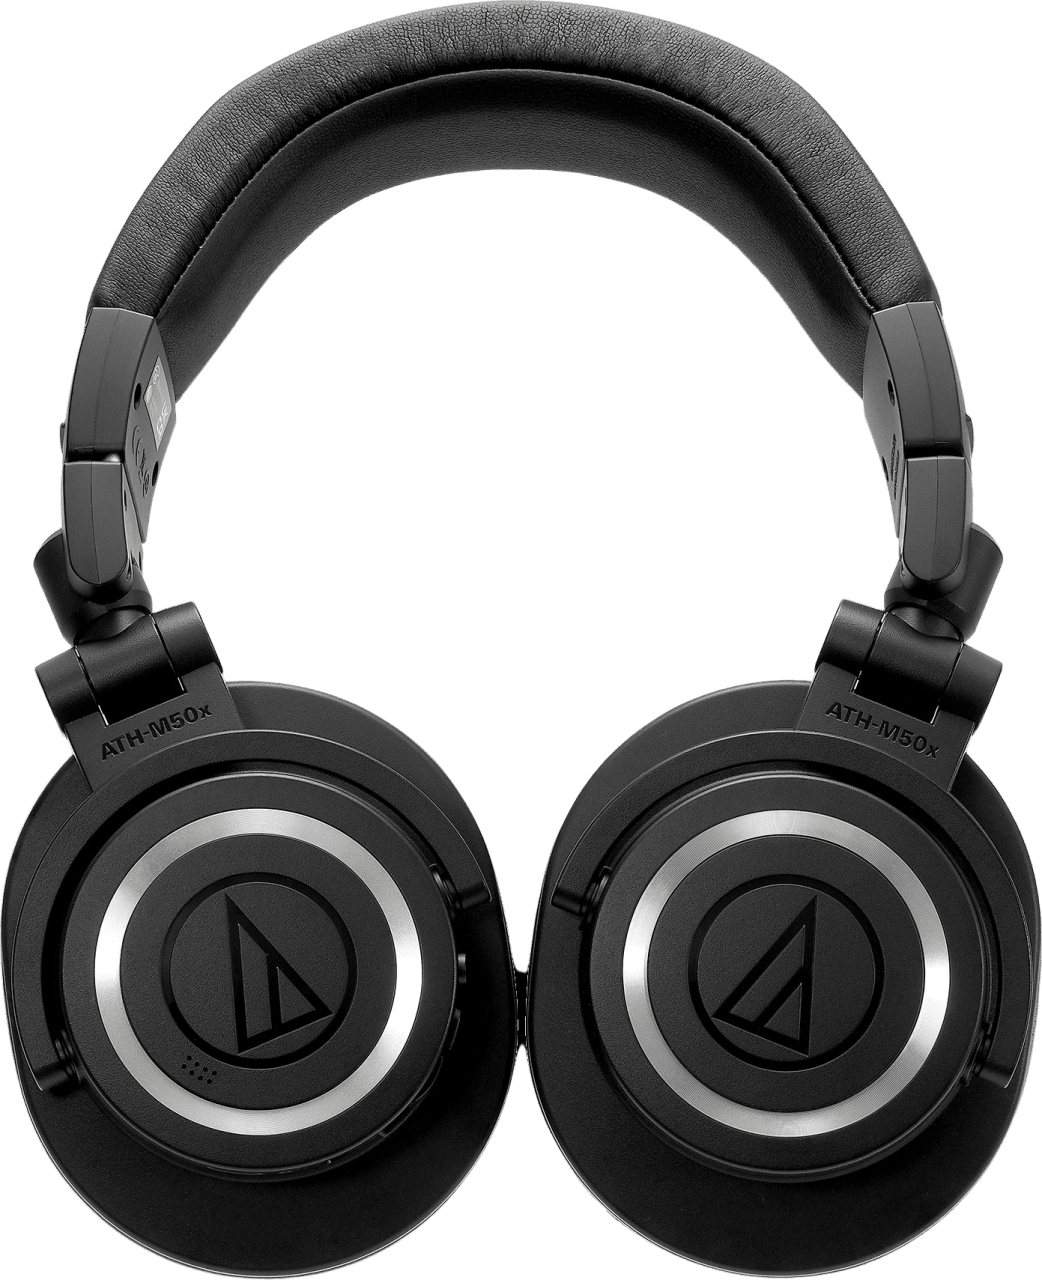 Black Audio-Technica ATH-M50XBT2 Closed-back Wireless Dynamic Over-ear Professional Monitor Headphones.5